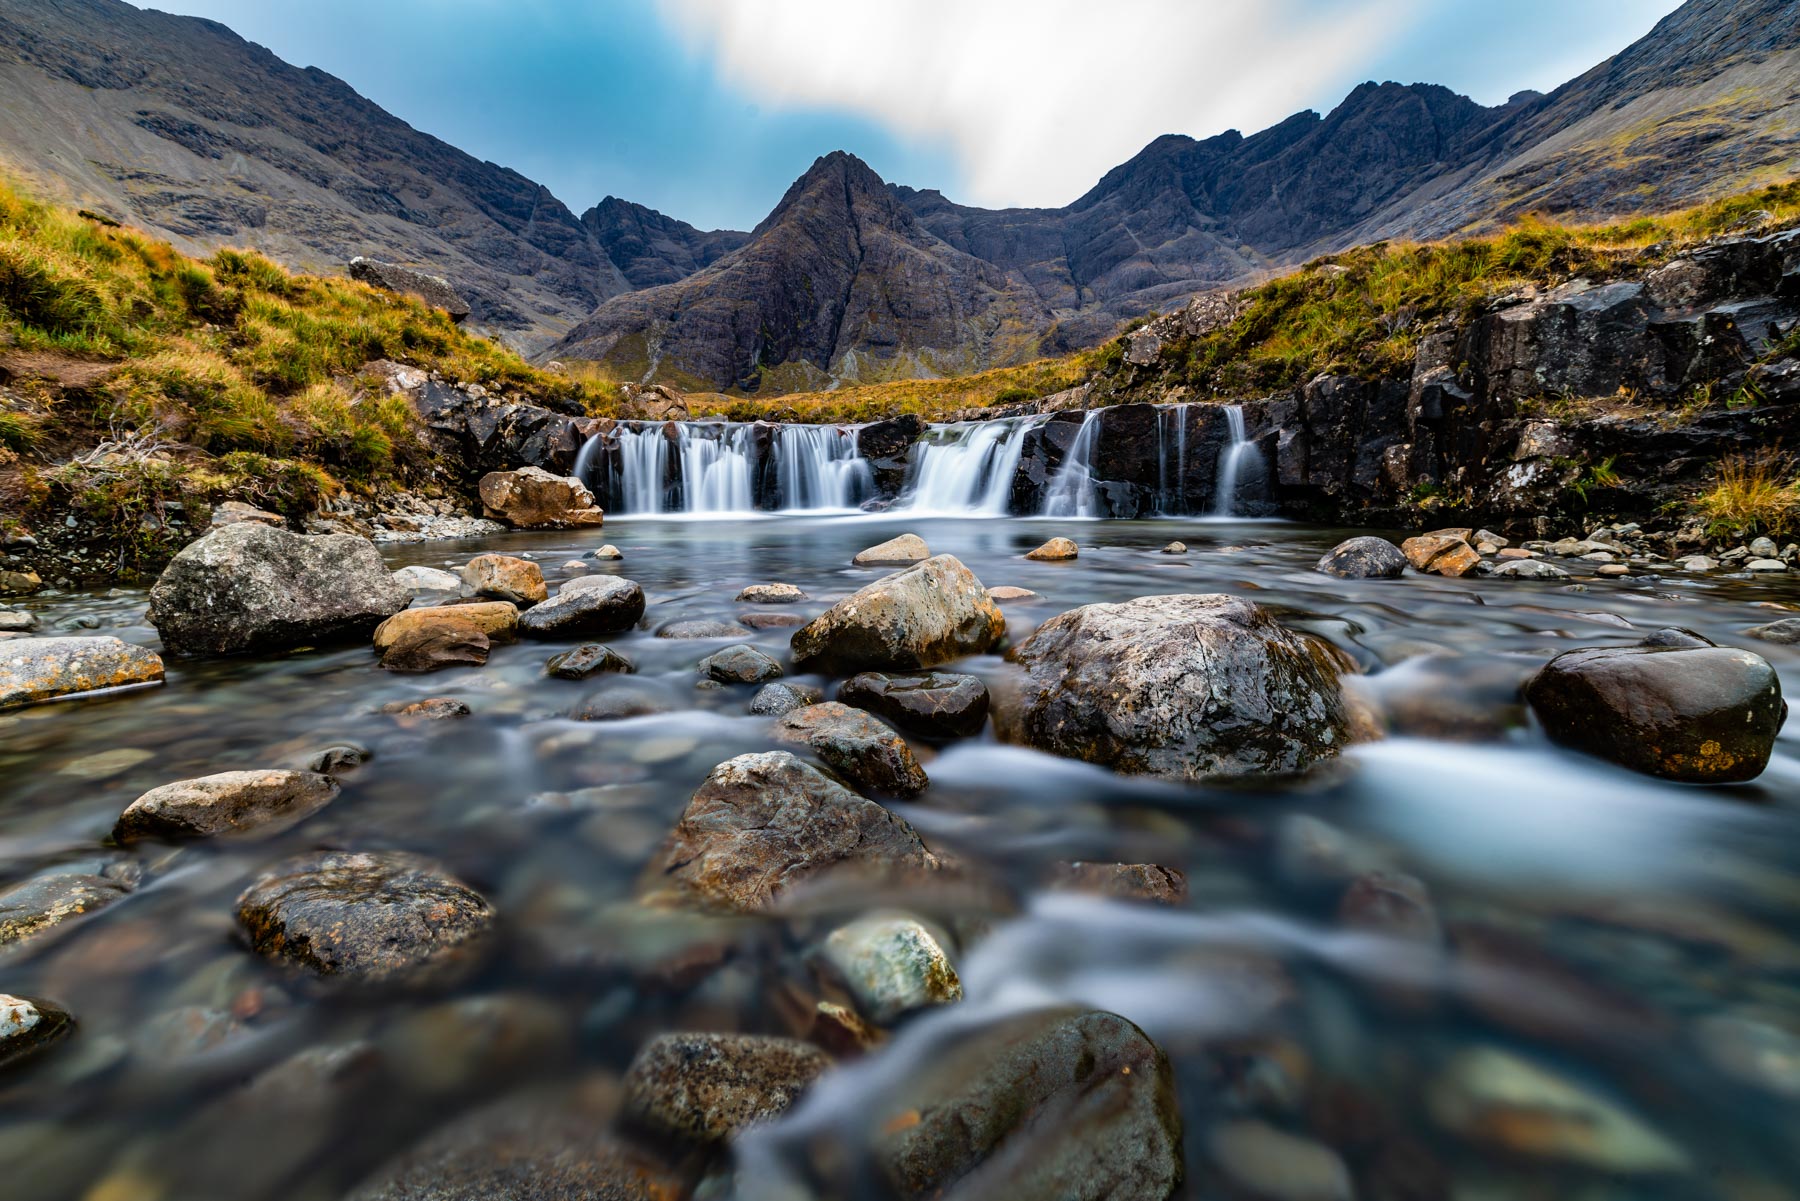 Fairy Pools Scotland
Best things to do Scotland 